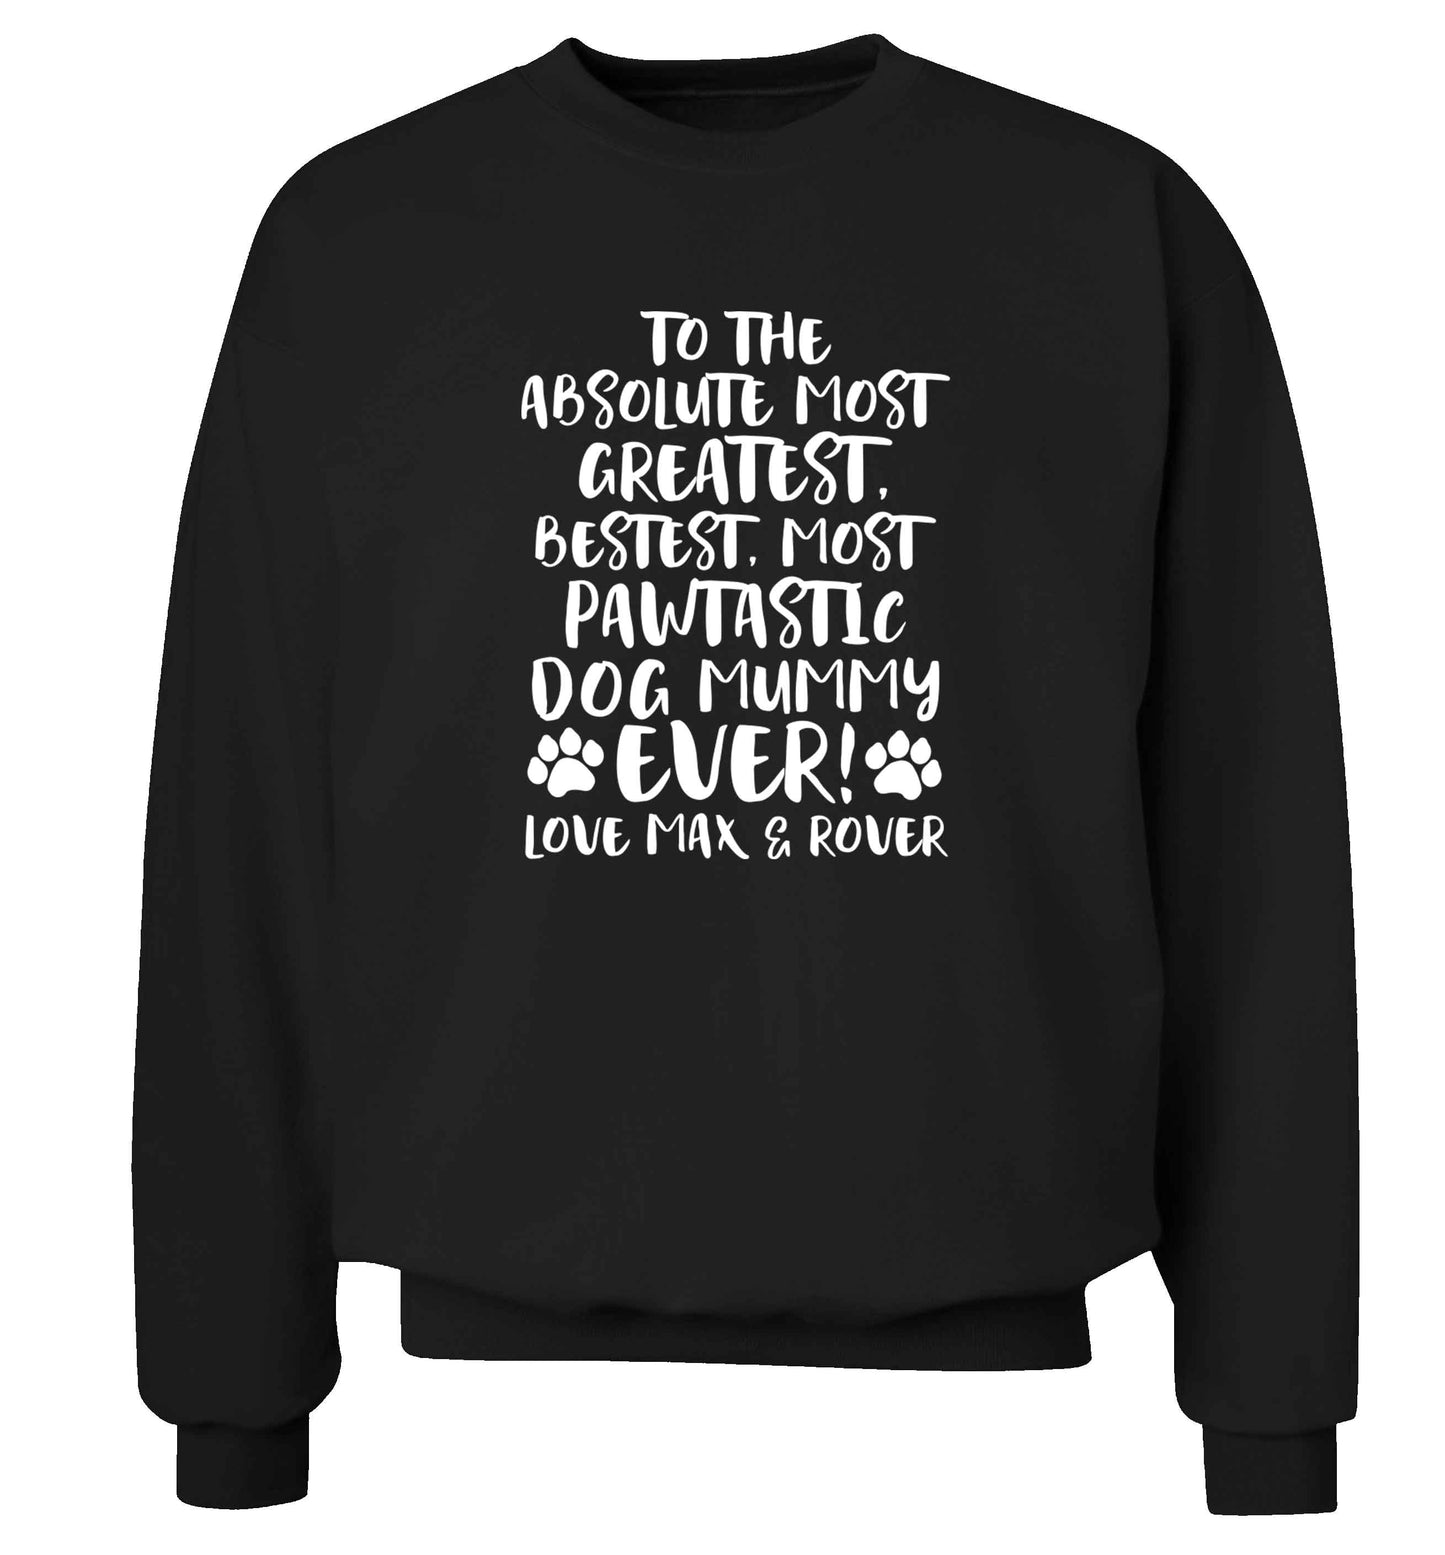 Personalsied to the most pawtastic dog mummy ever Adult's unisex black Sweater 2XL